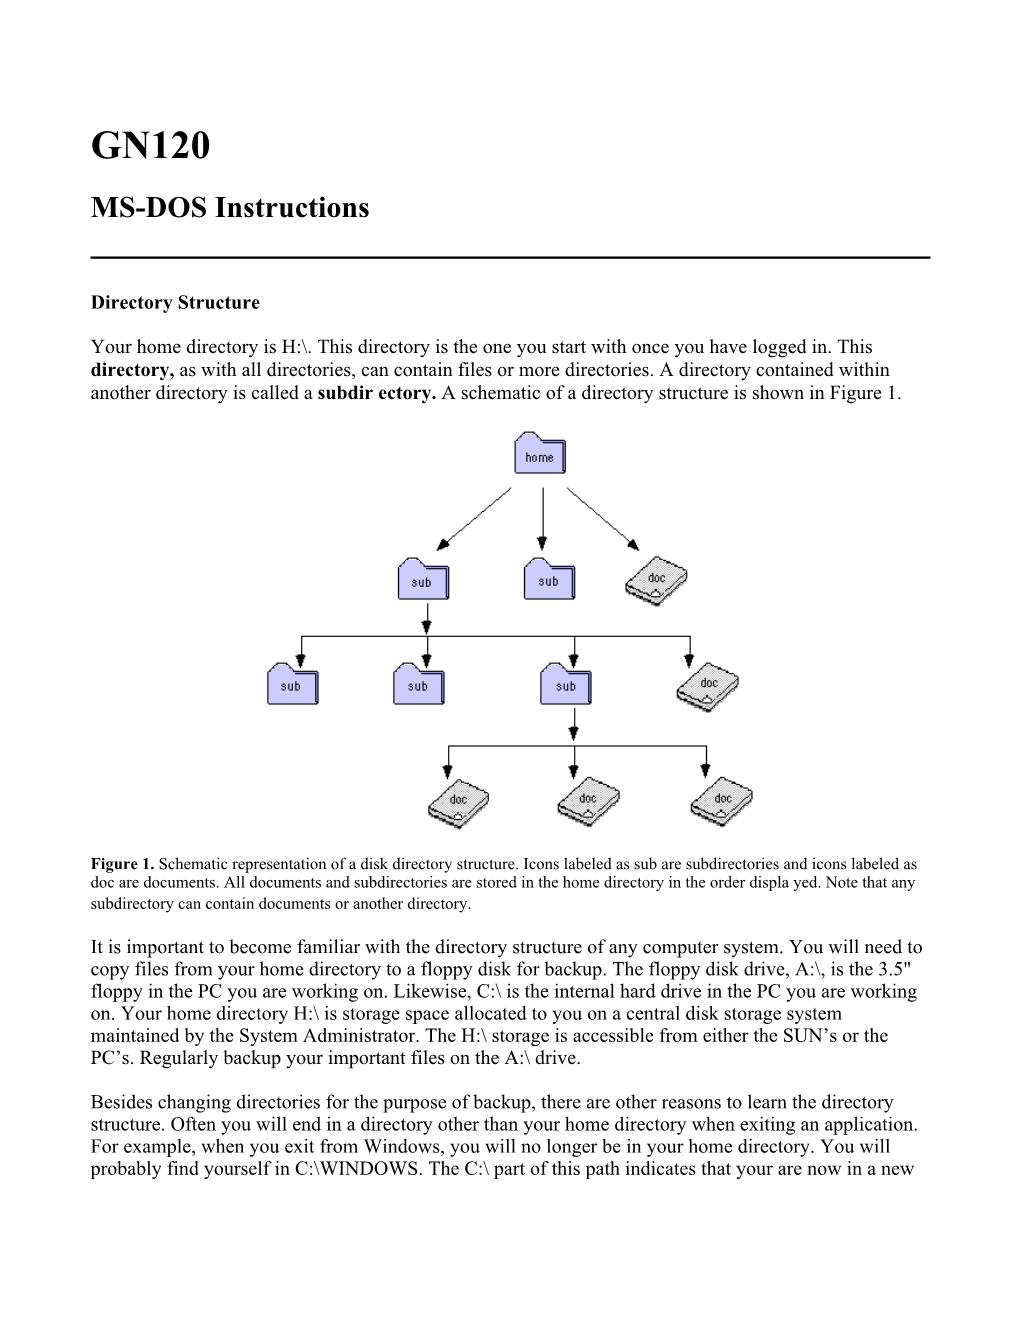 MS-DOS Instructions